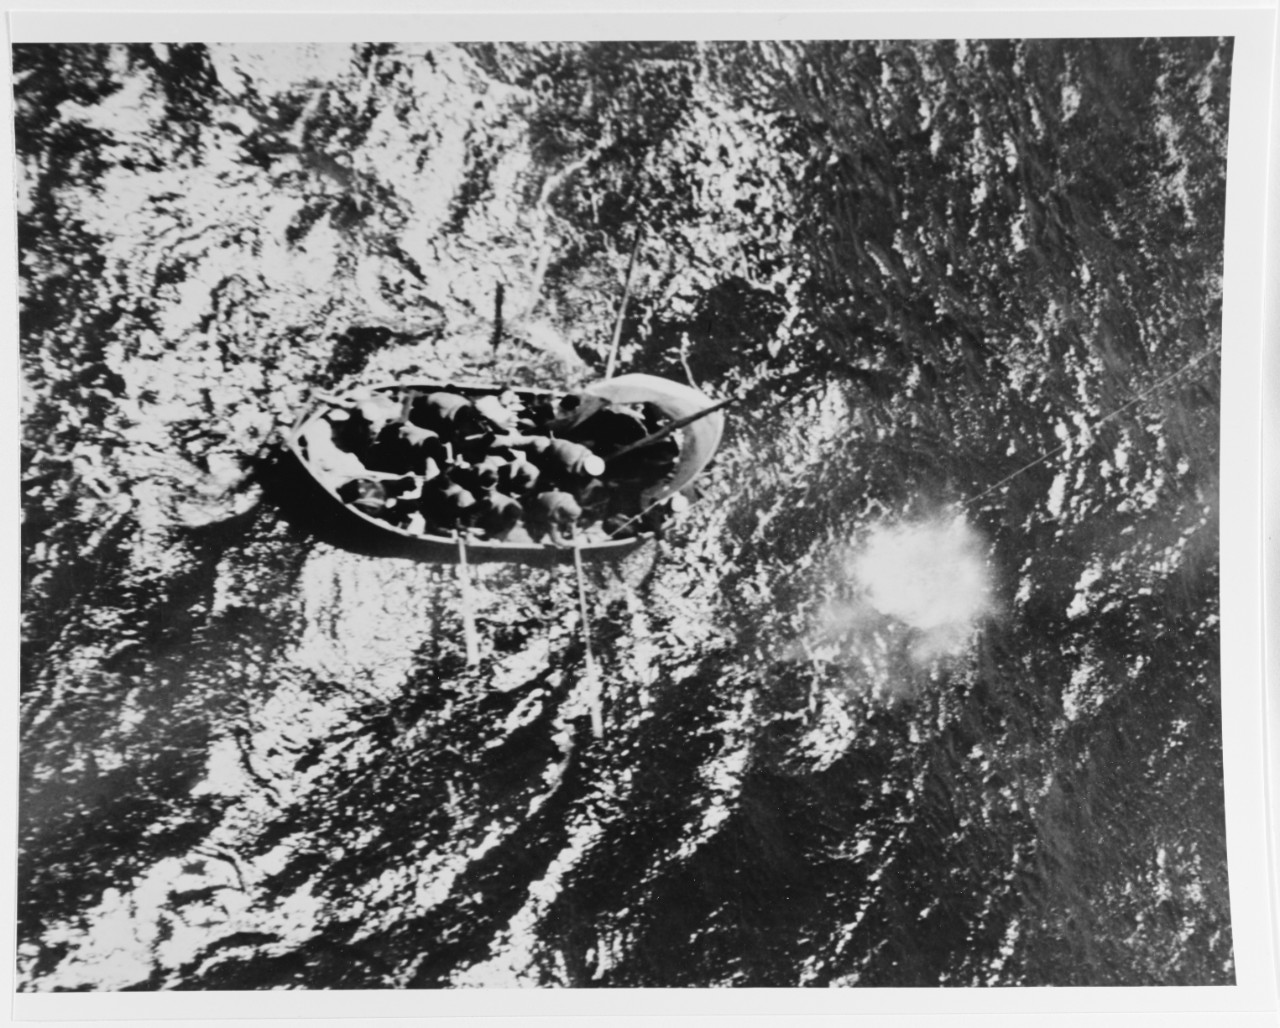 Survivors in lifeboat